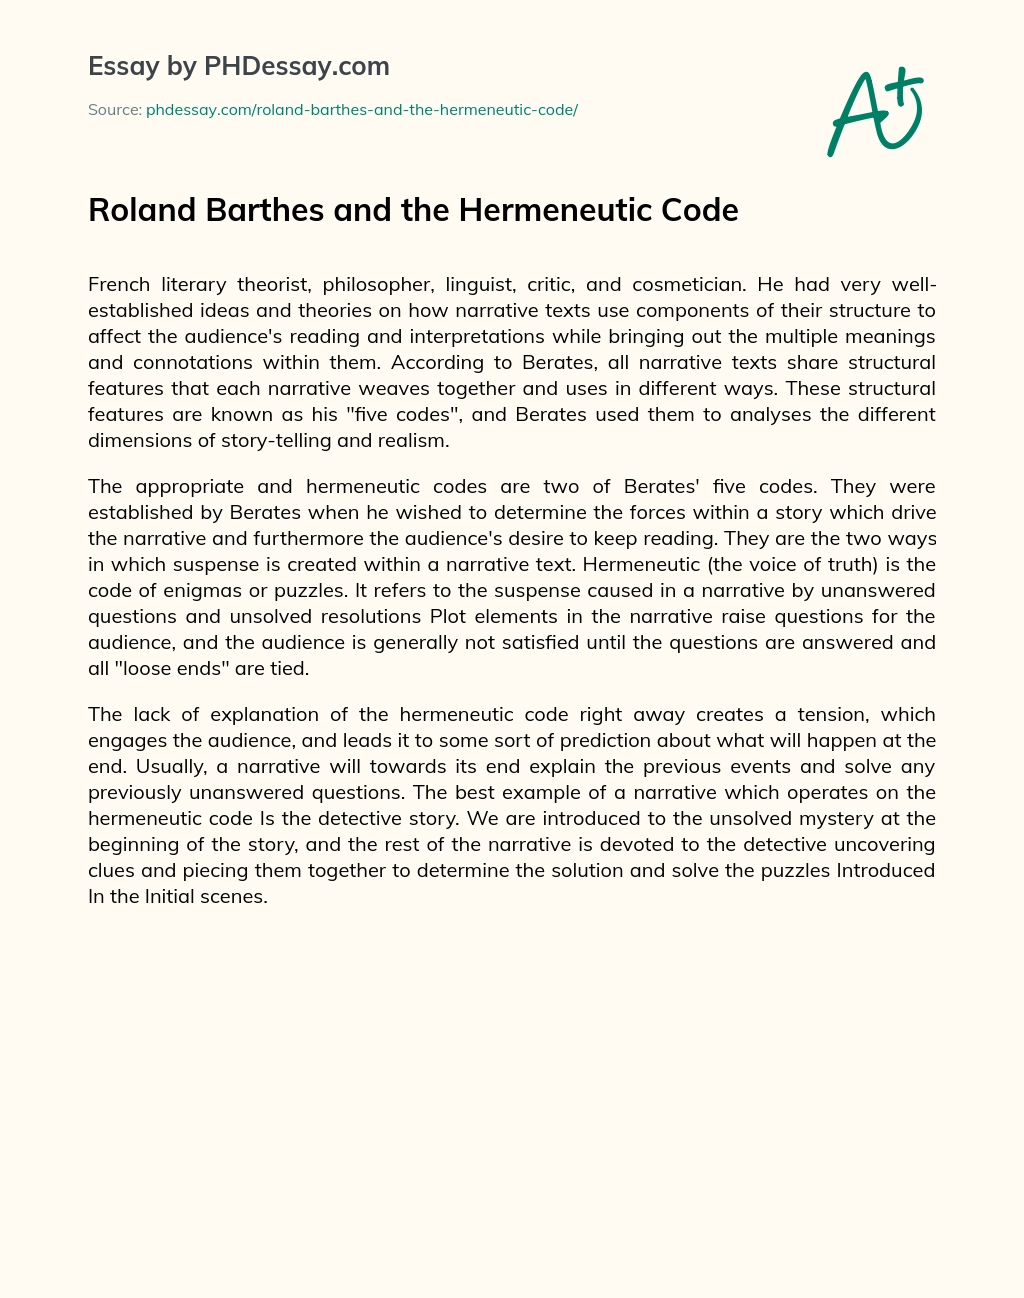 Roland Barthes and the Hermeneutic Code essay